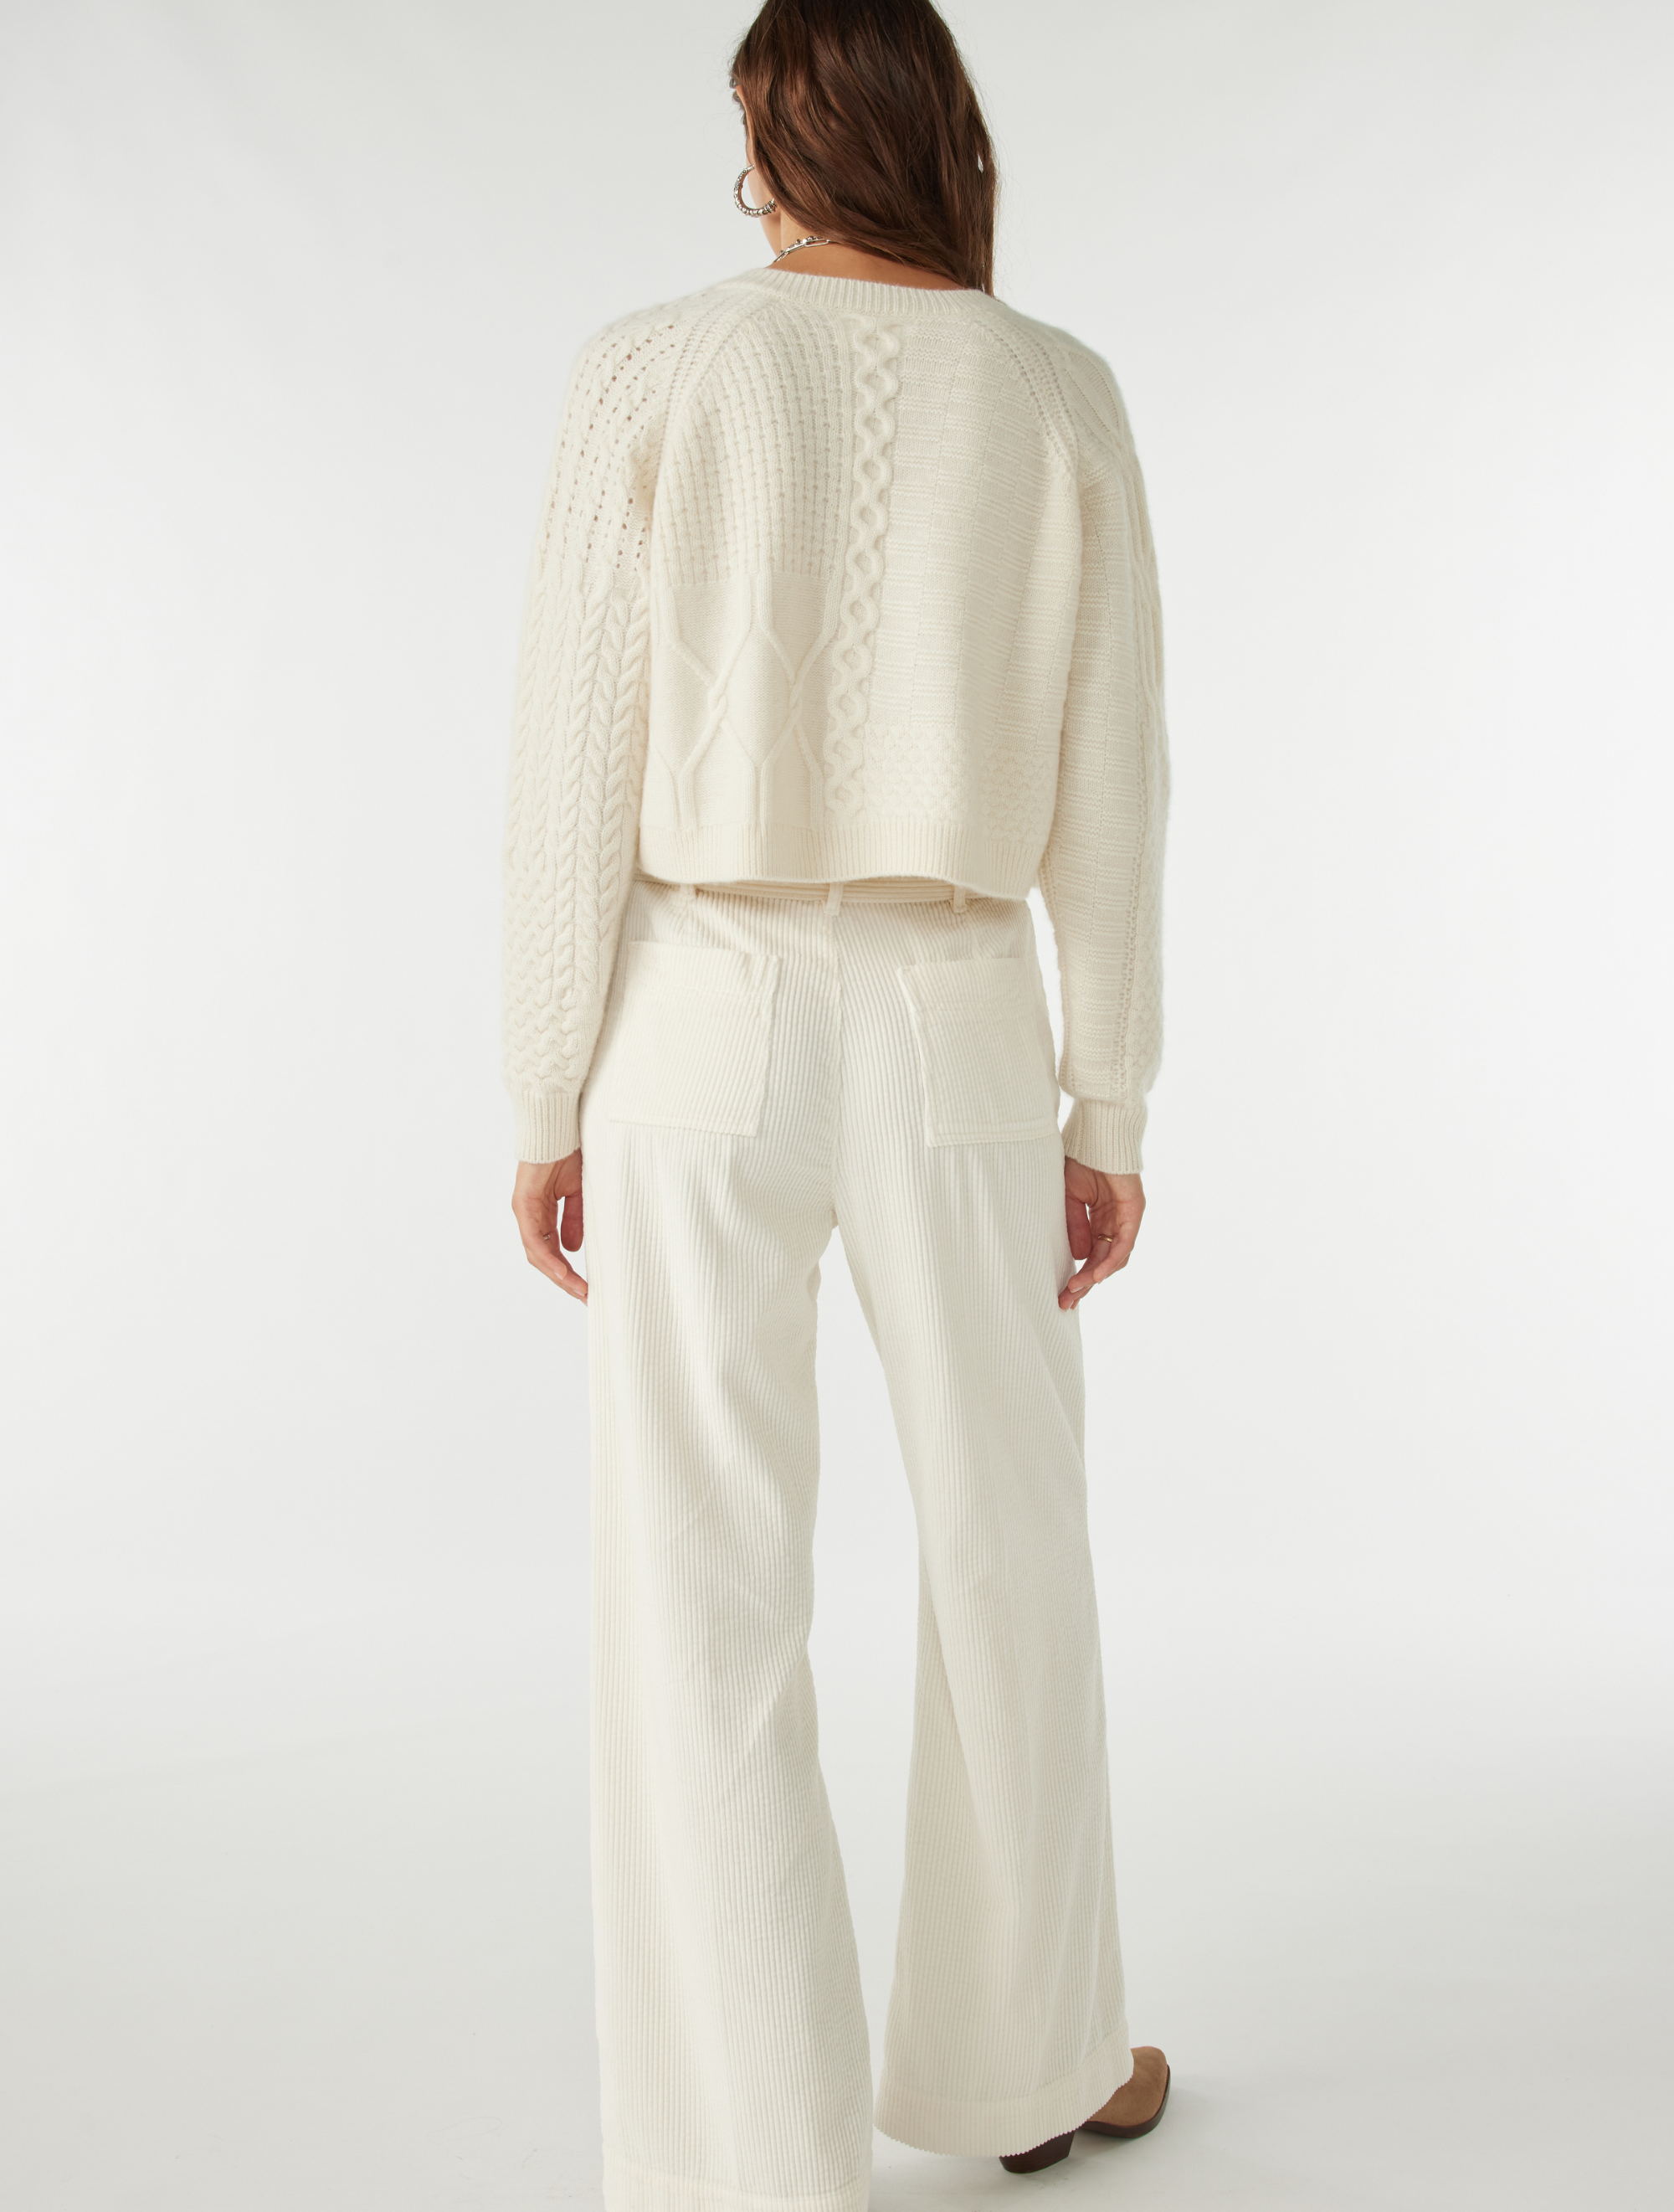 White cord trousers with tie belt 